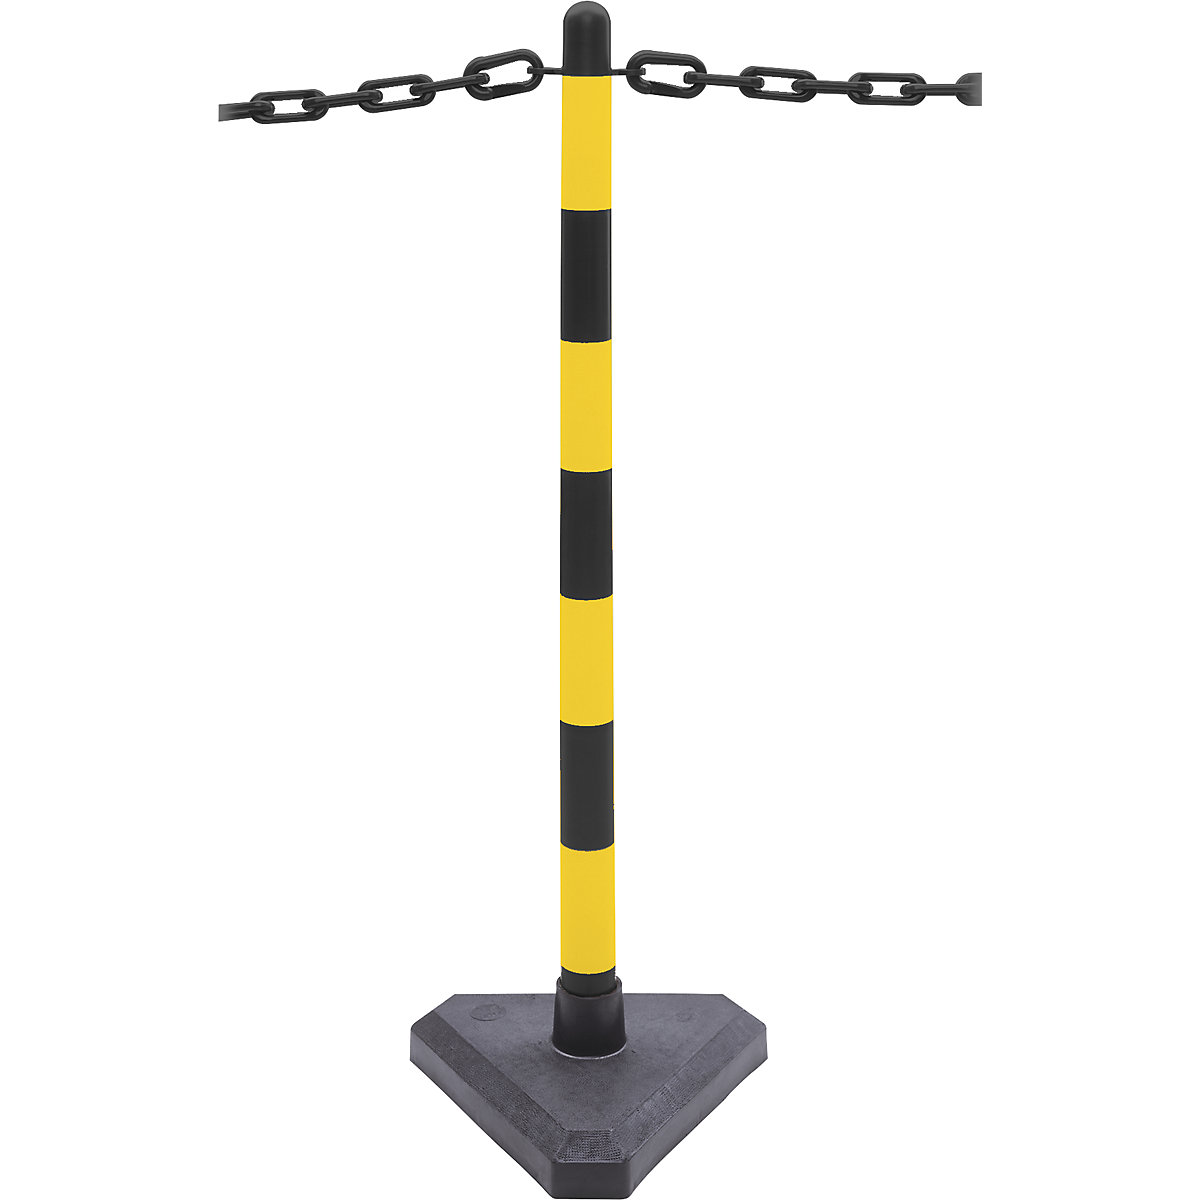 Chain stand set, cement-filled triangular foot, 6 posts, 10 m chain, black / yellow